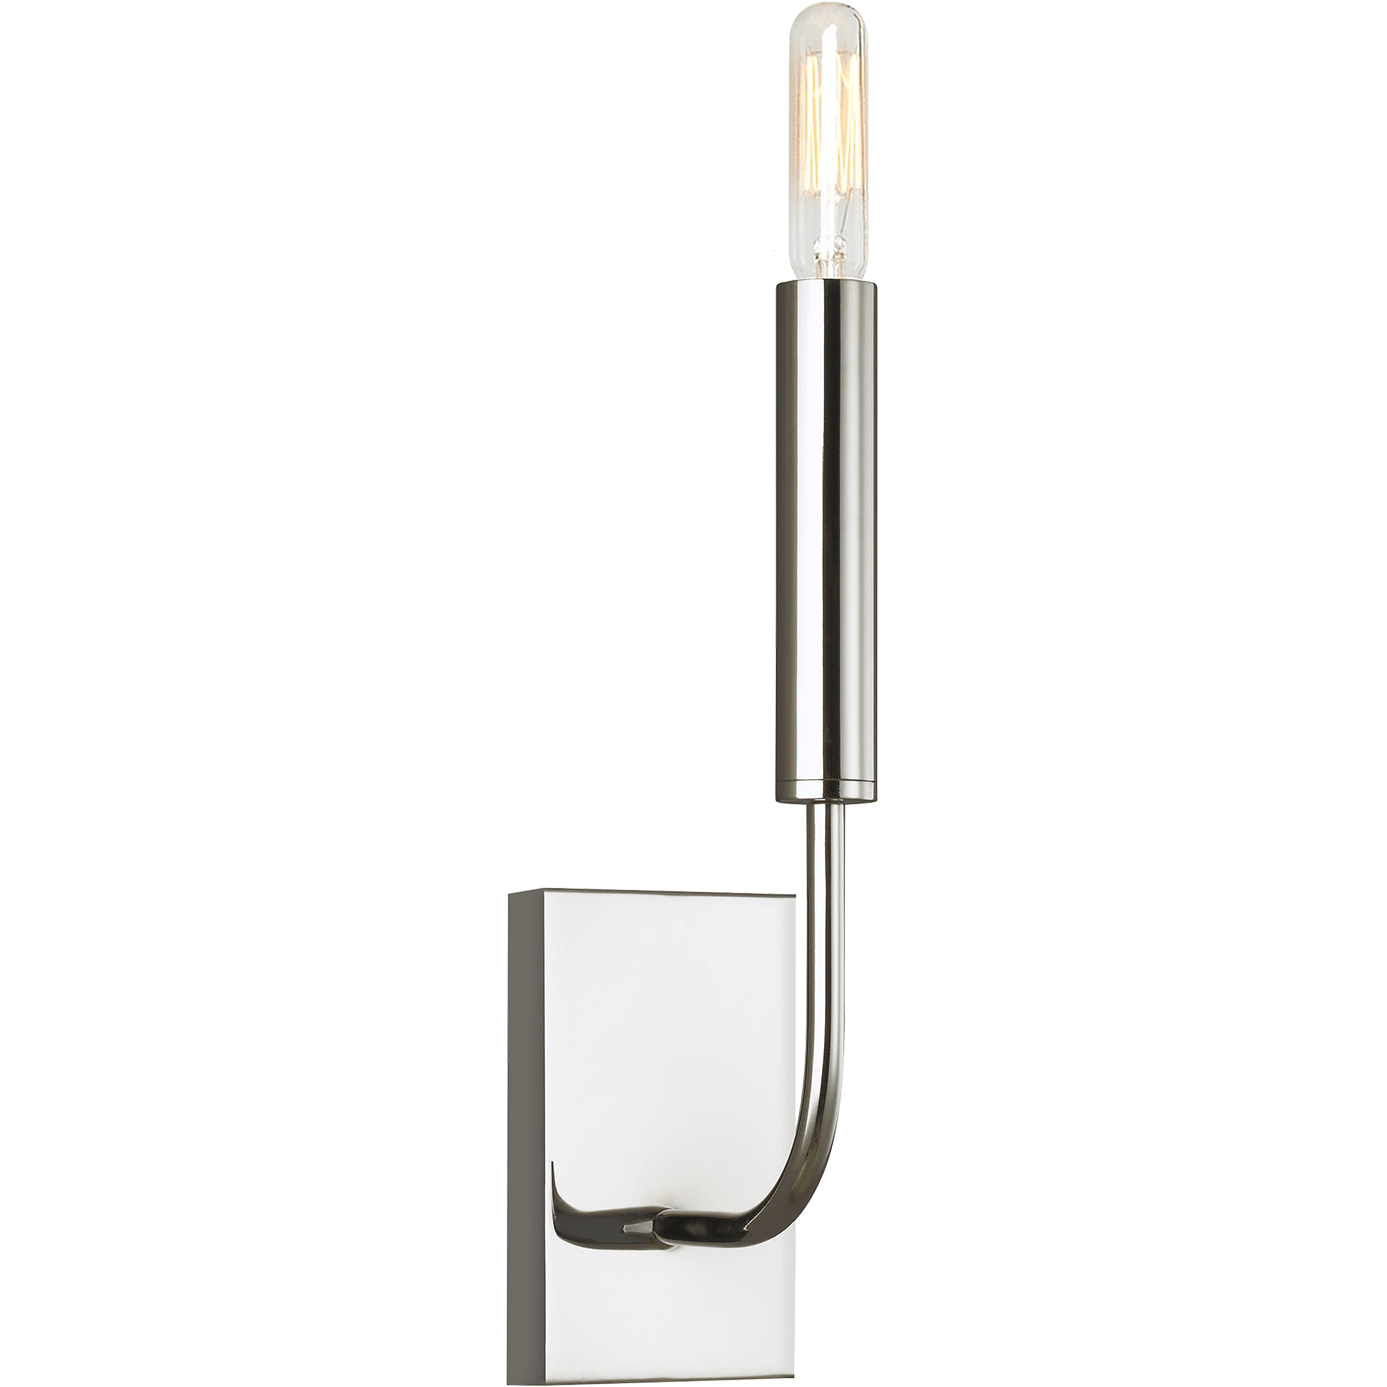 Visual Comfort Studio Collection - Brianna Sconce - Lights Canada